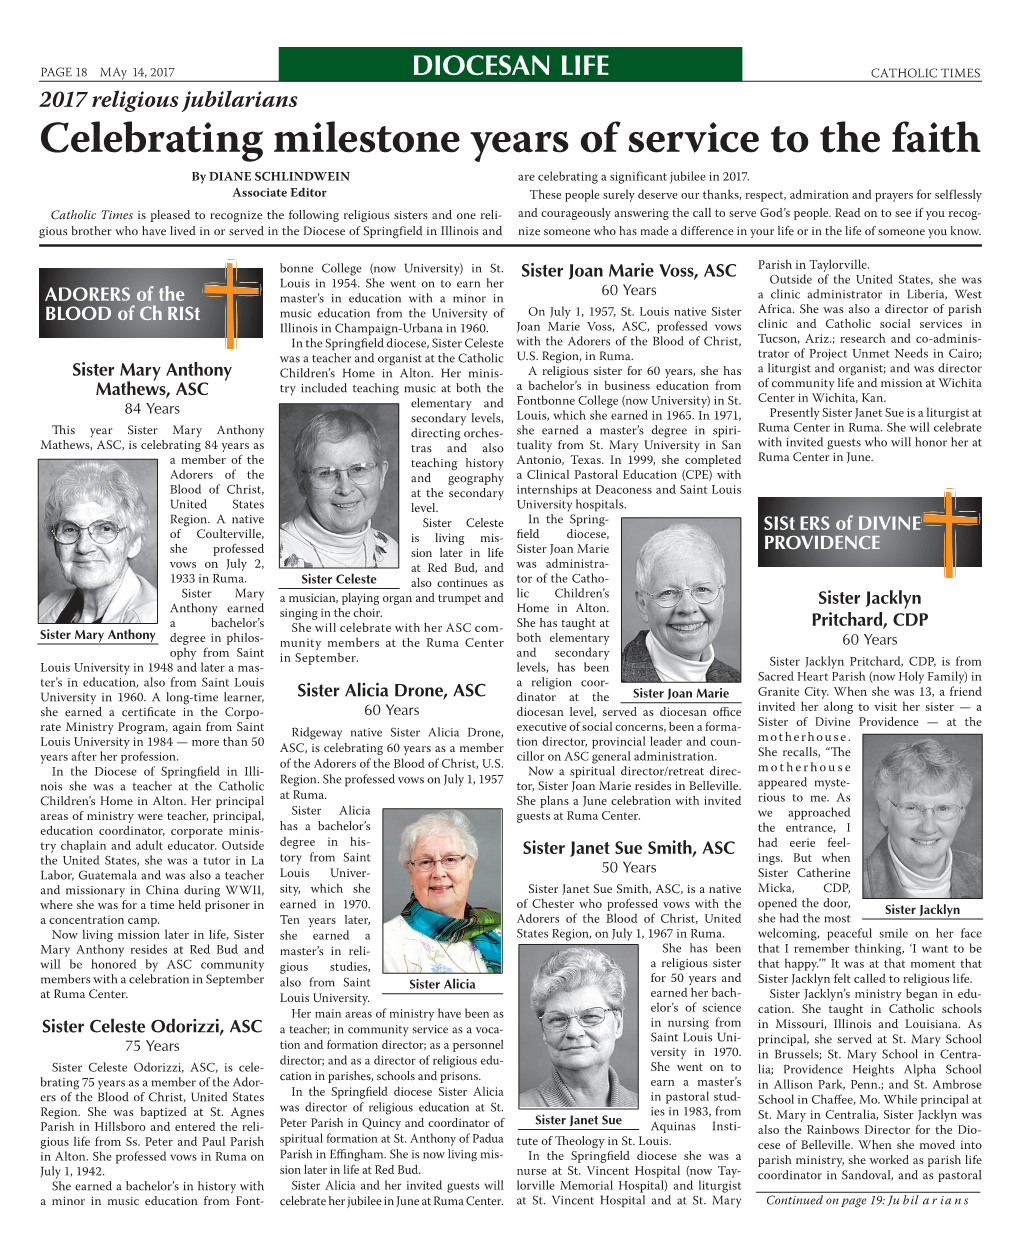 Celebrating Milestone Years of Service to the Faith by DIANE SCHLINDWEIN Are Celebrating a Significant Jubilee in 2017